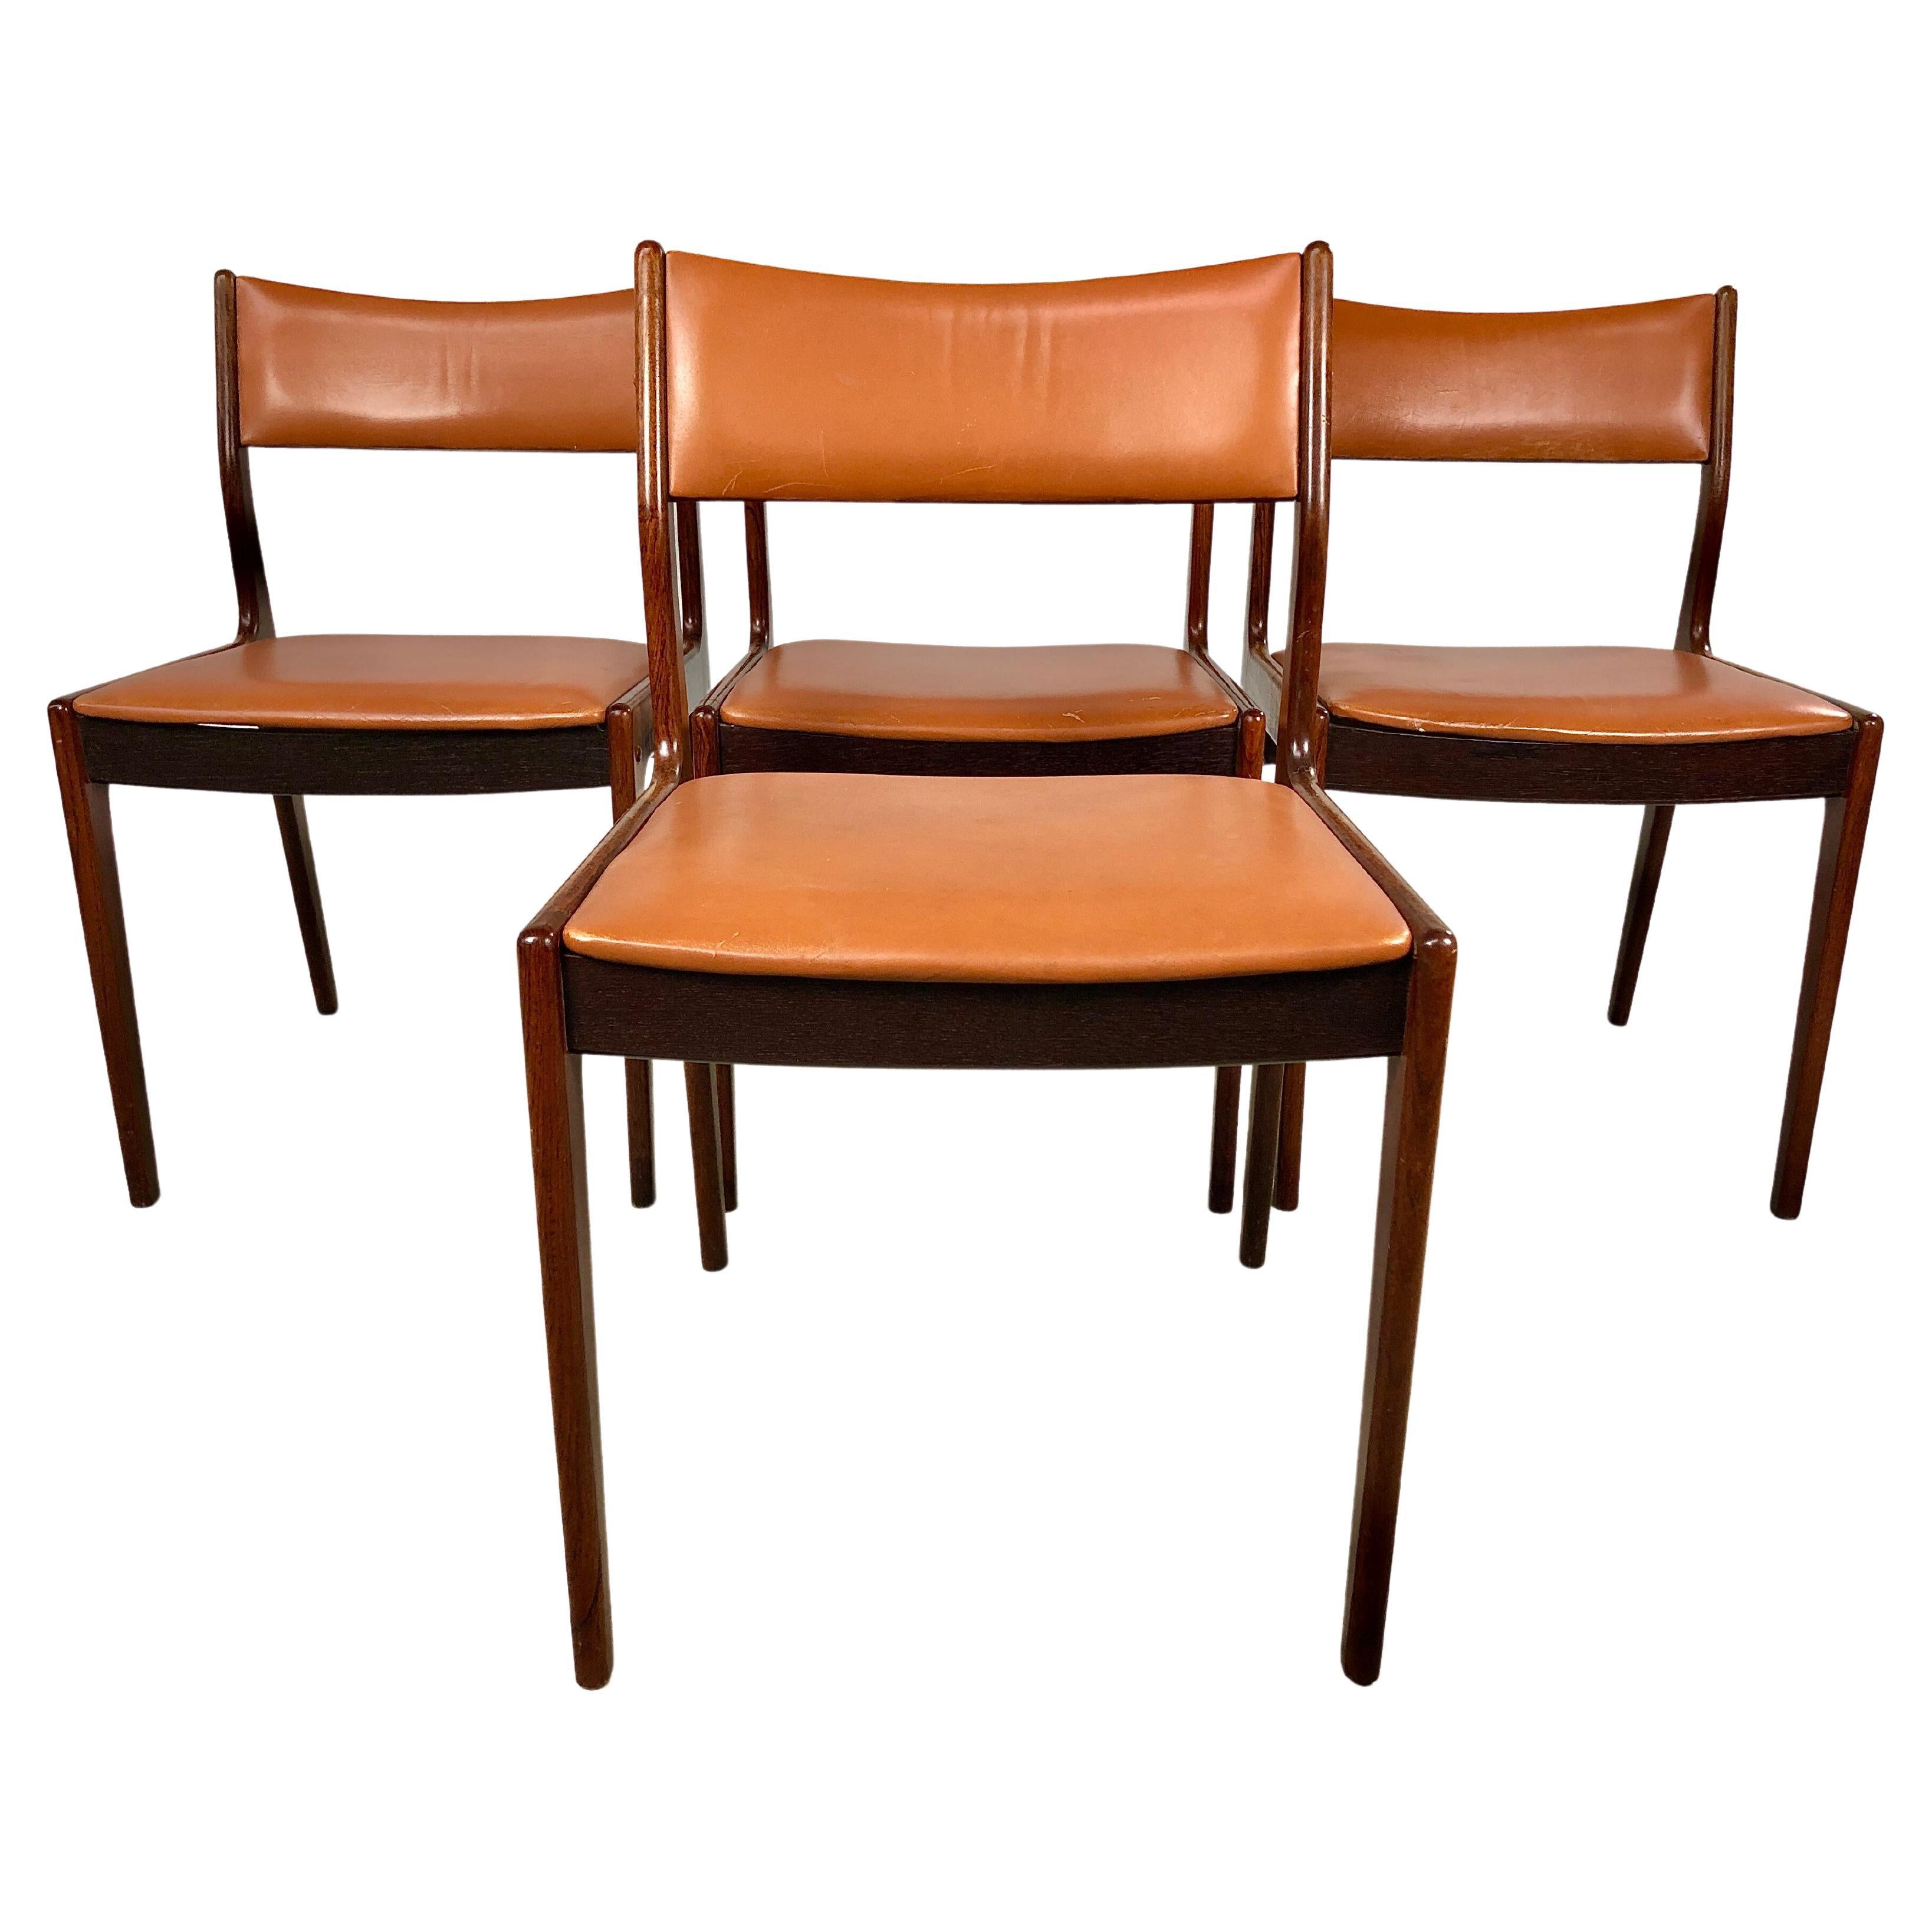 Restored Johannes Andersen Rosewood Dining Chairs Custom Reupholstey Included